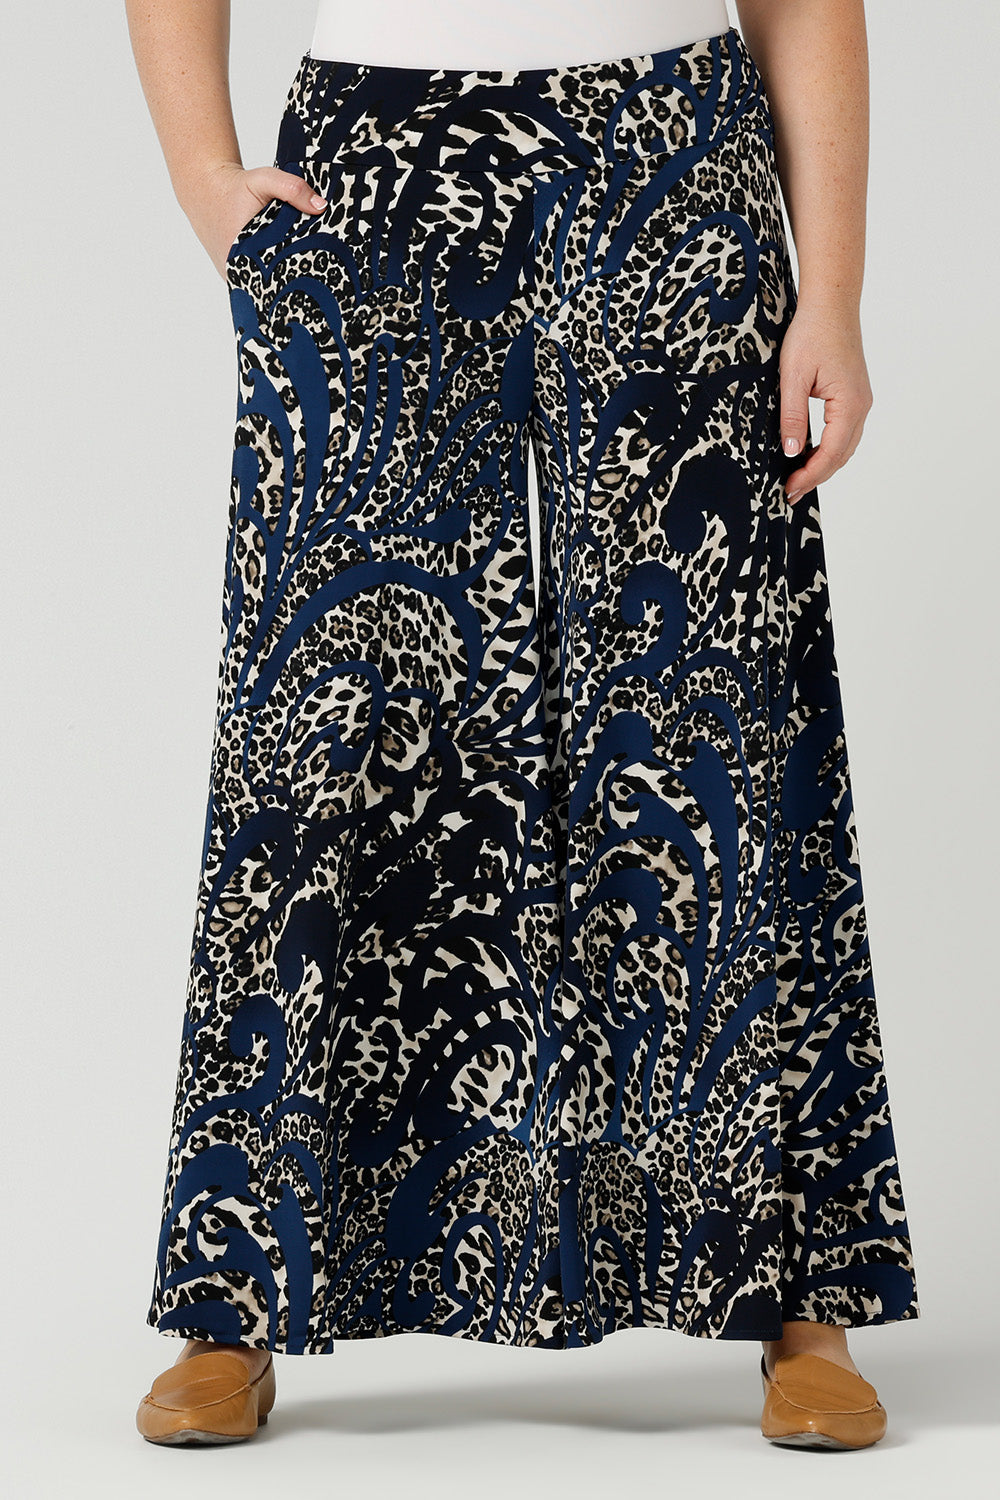 Close up of A curvy size, size 12 woman wears printed wide leg pants with pockets with a navy round neck top. These pull-on, easy care pants are comfortable for your everyday workwear capsule wardrobe. Shop these Australian-made wide leg trousers online in sizes 8 to 24, petite to plus sizes.